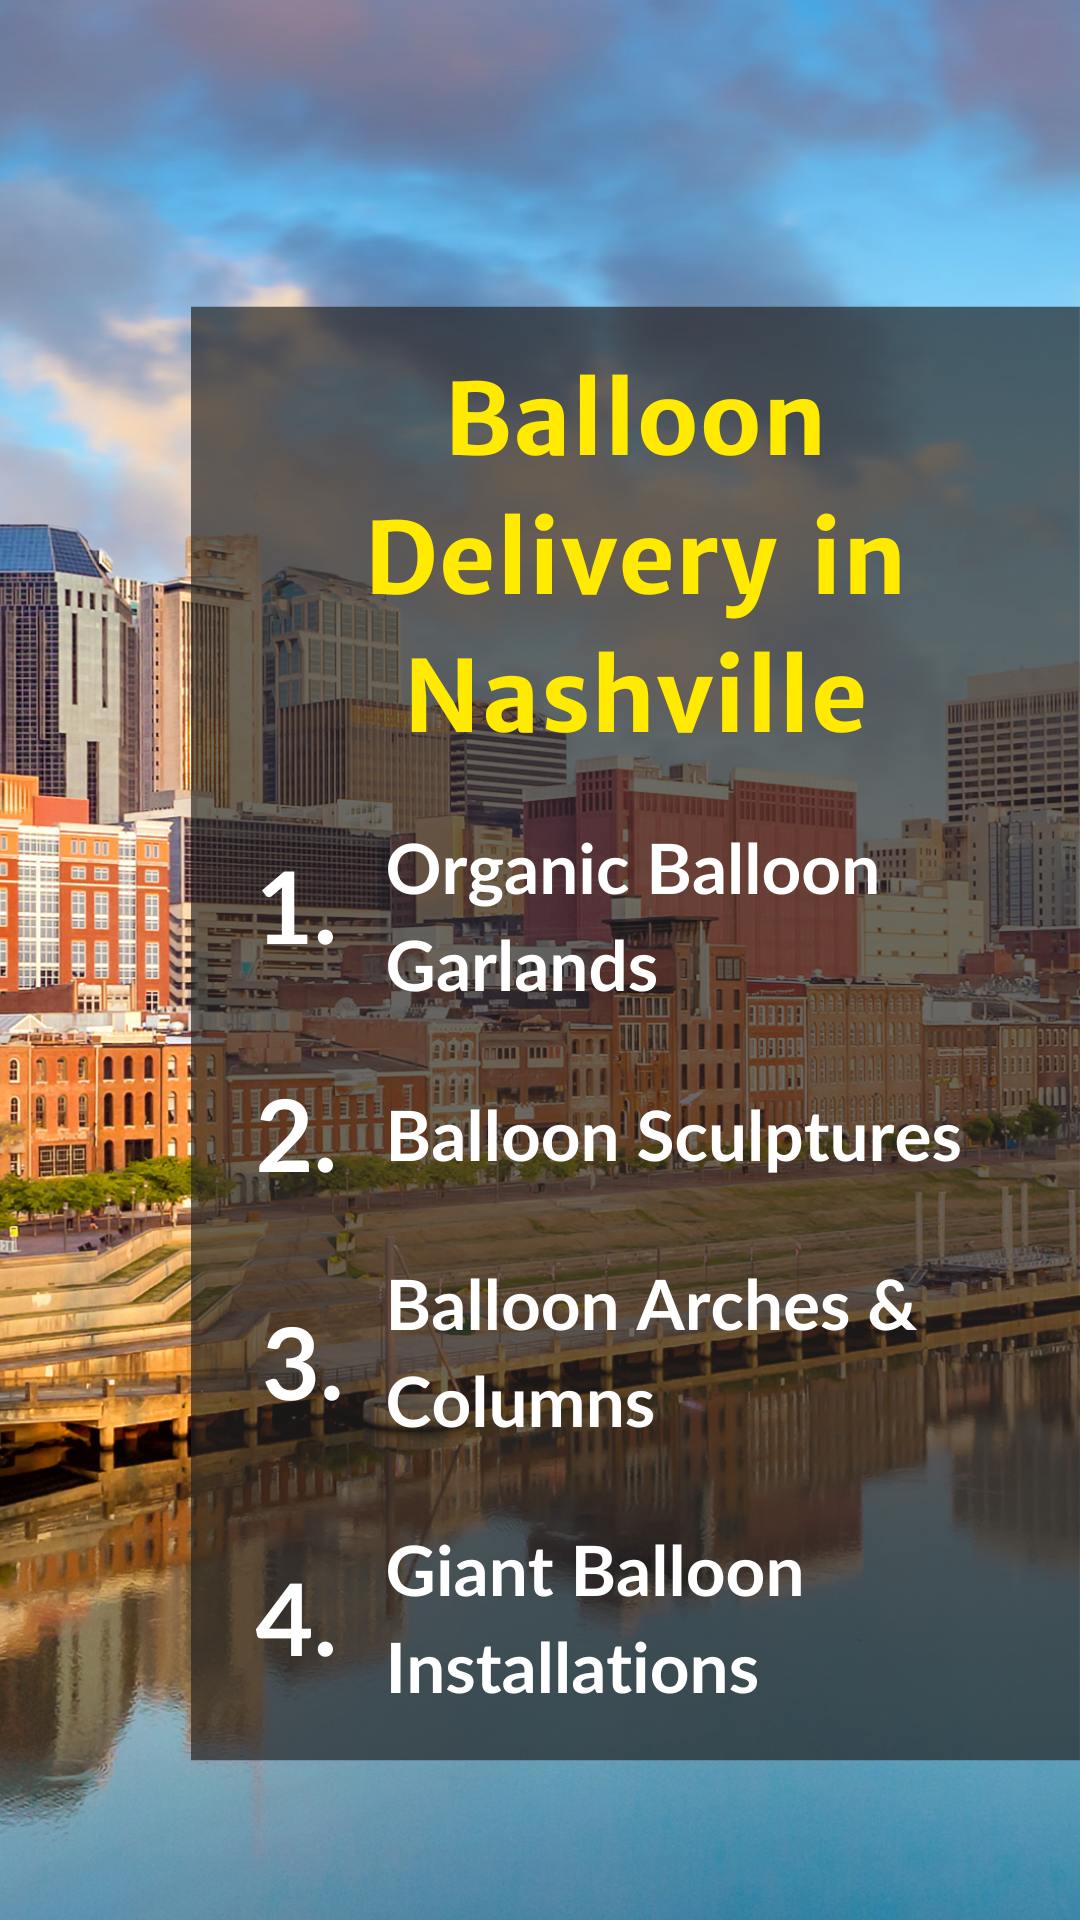 Balloon Delivery in Nashville